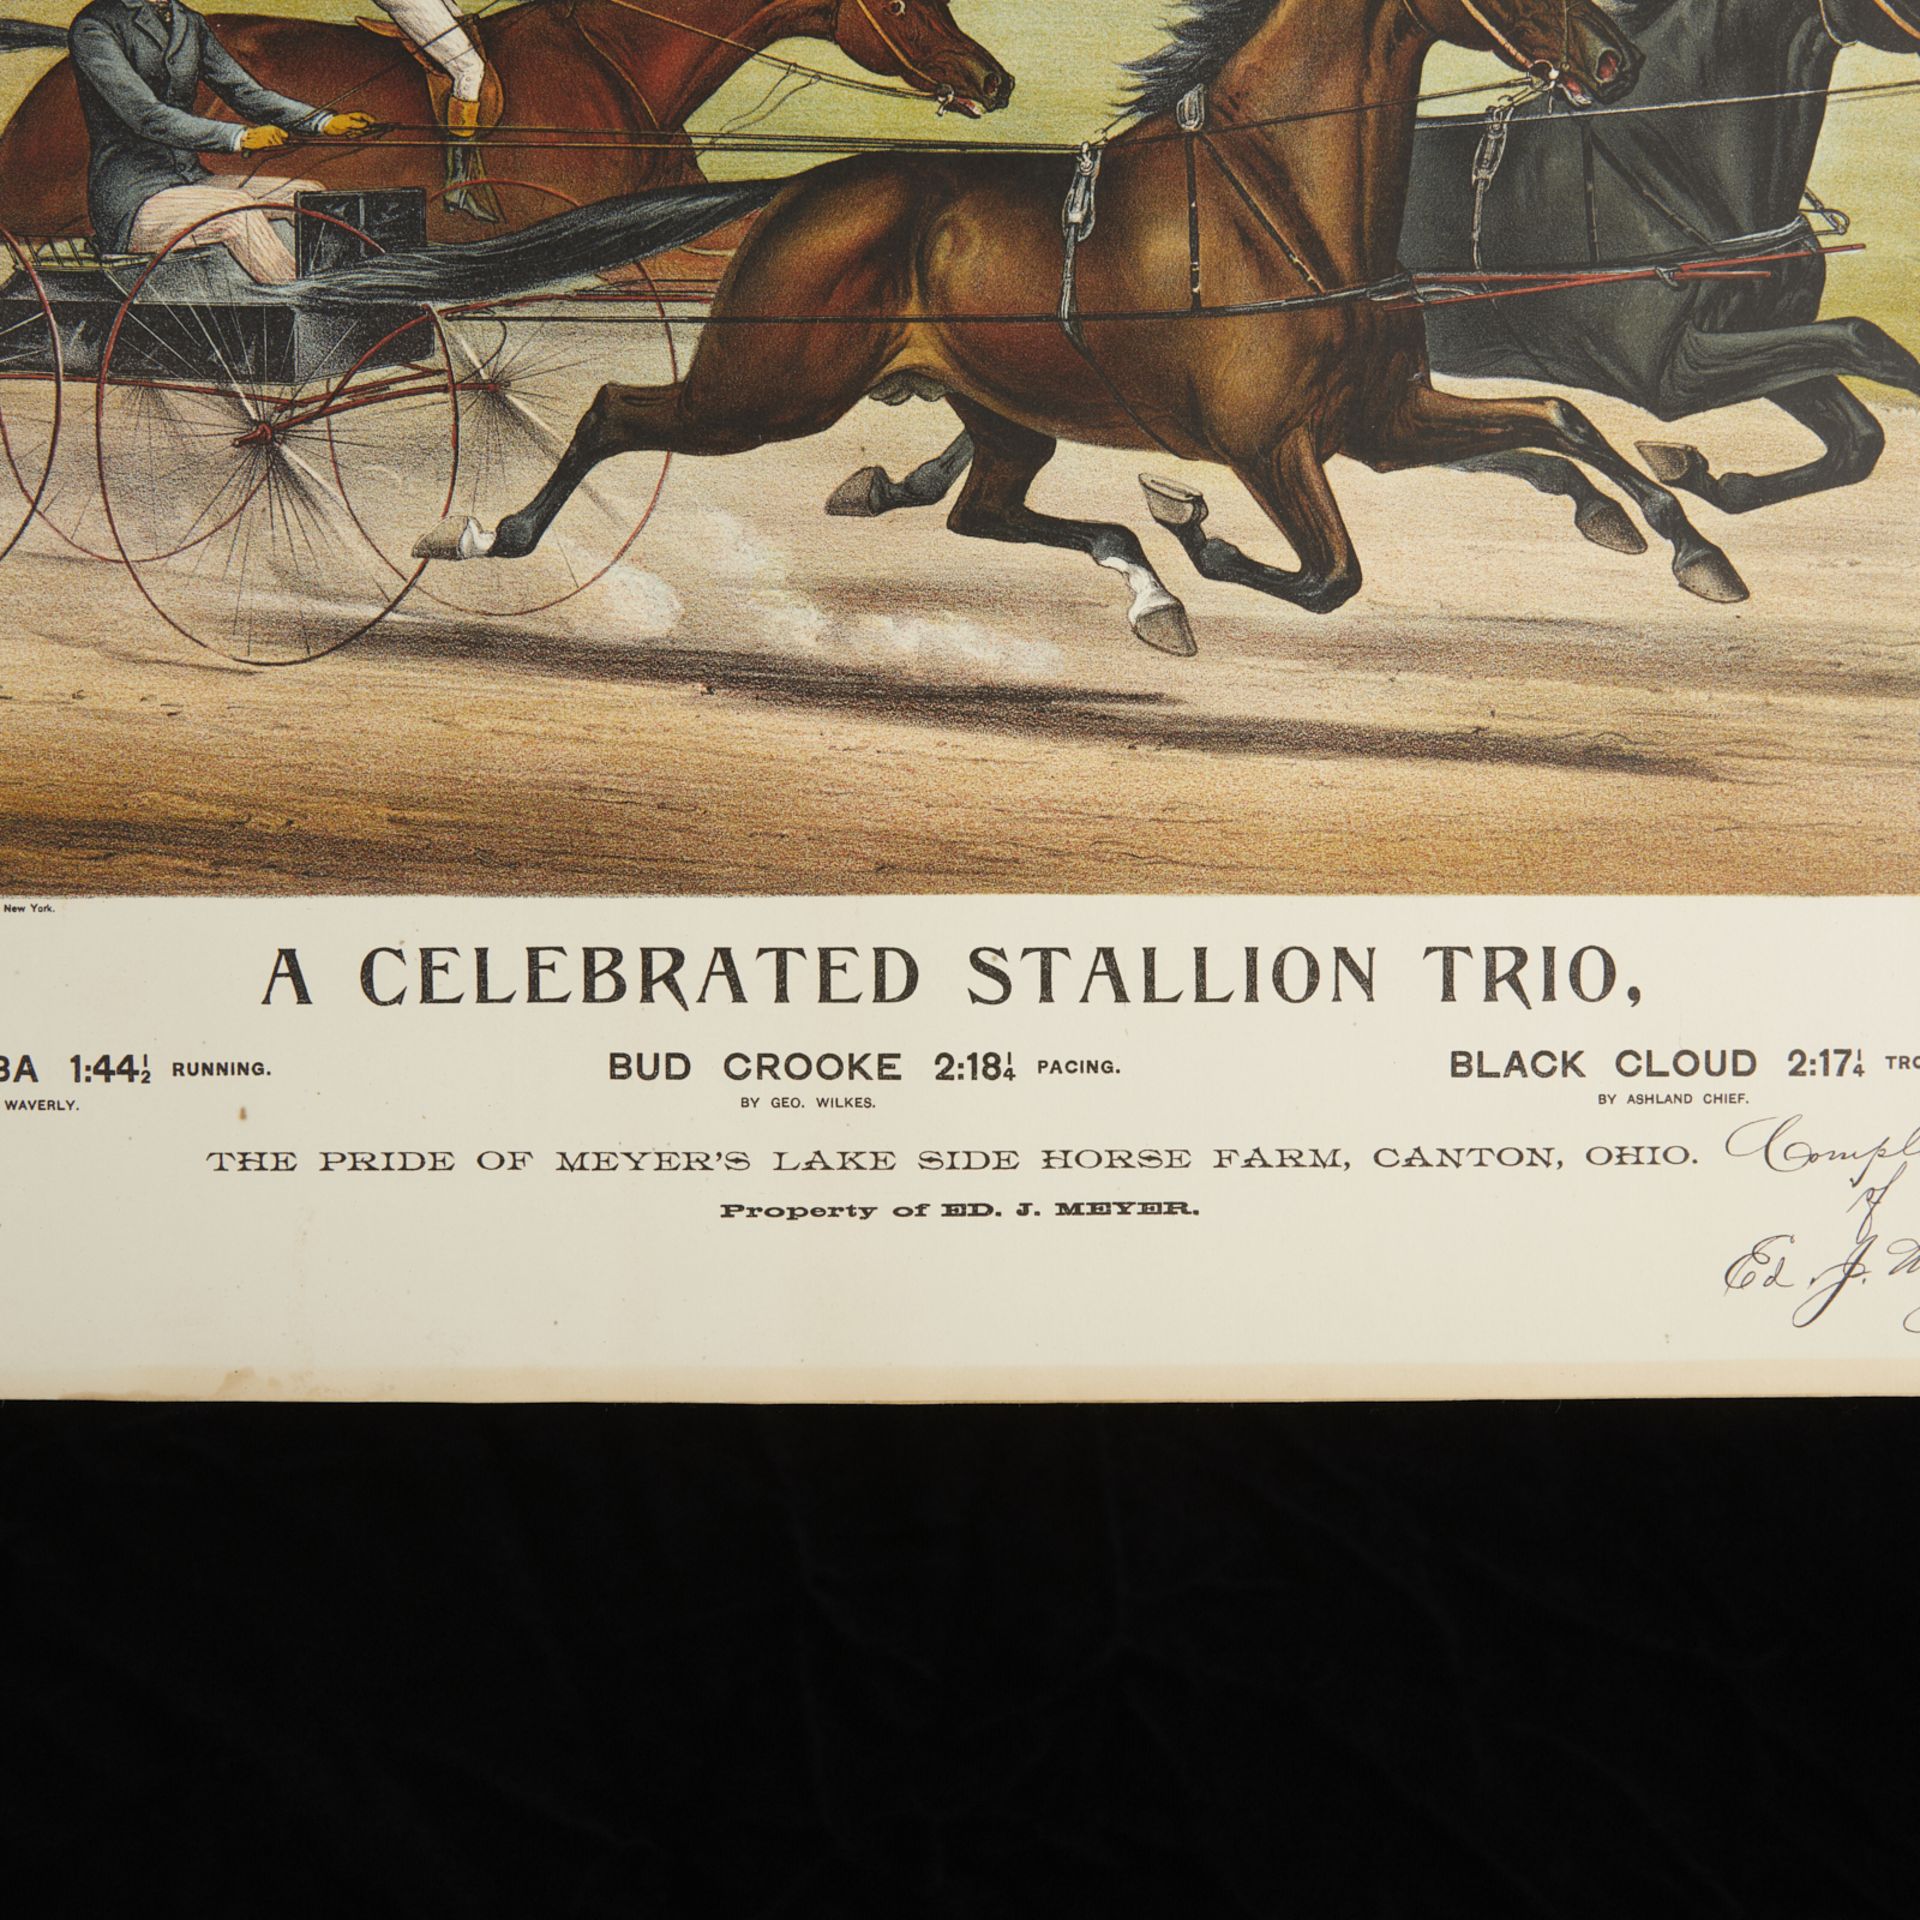 Currier & Ives "Celebrated Stallion Trio" Print - Image 2 of 9